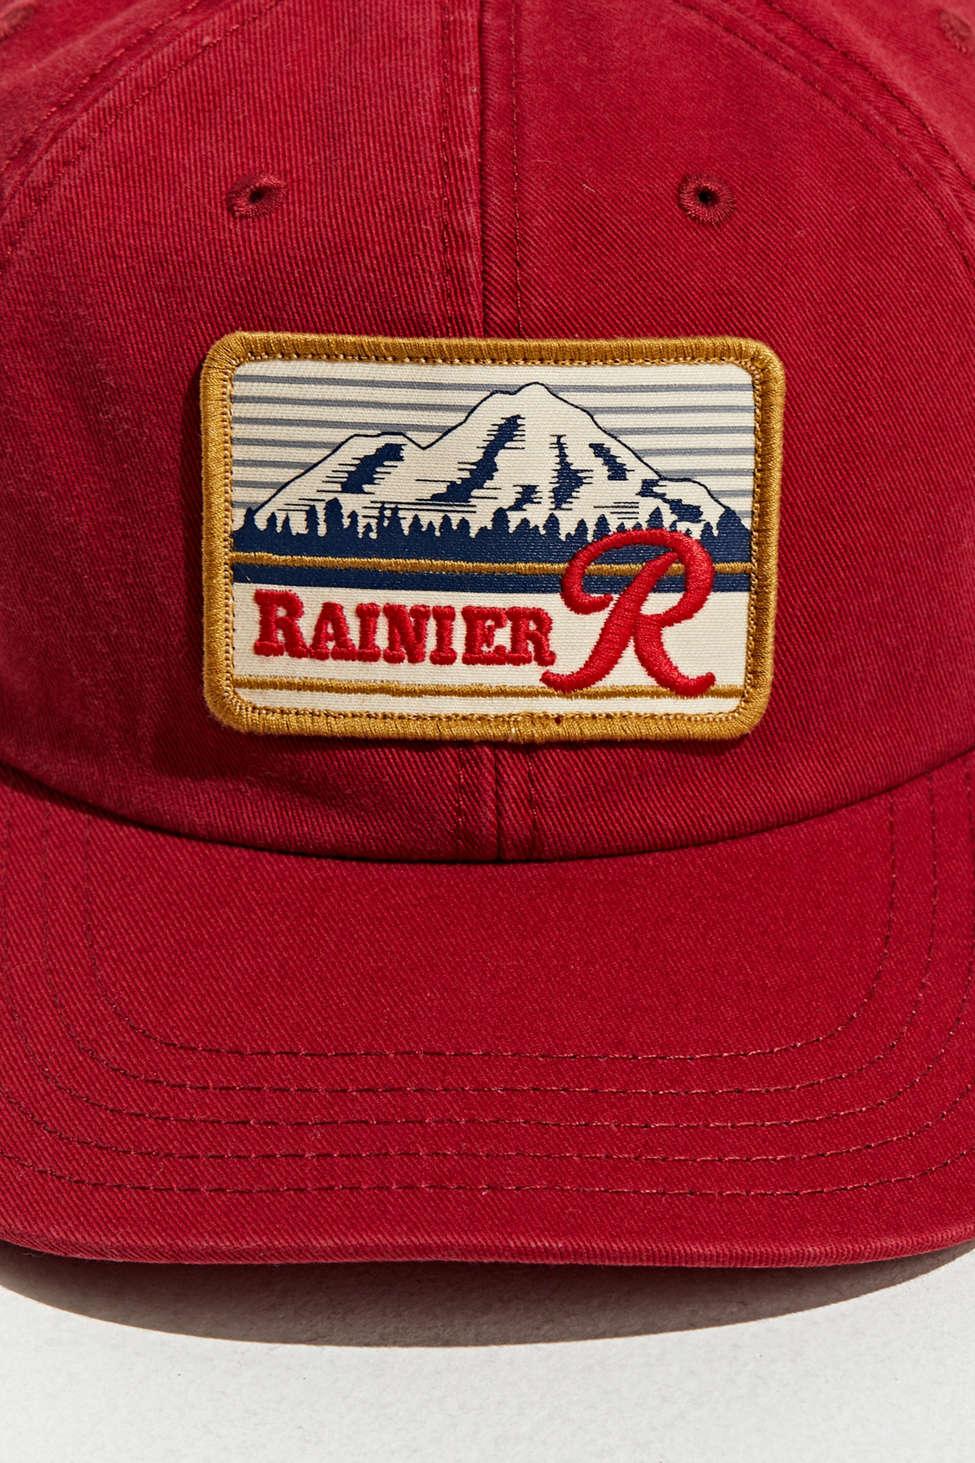 American Needle Cotton Rainier Patch Baseball Hat in Red for Men - Lyst